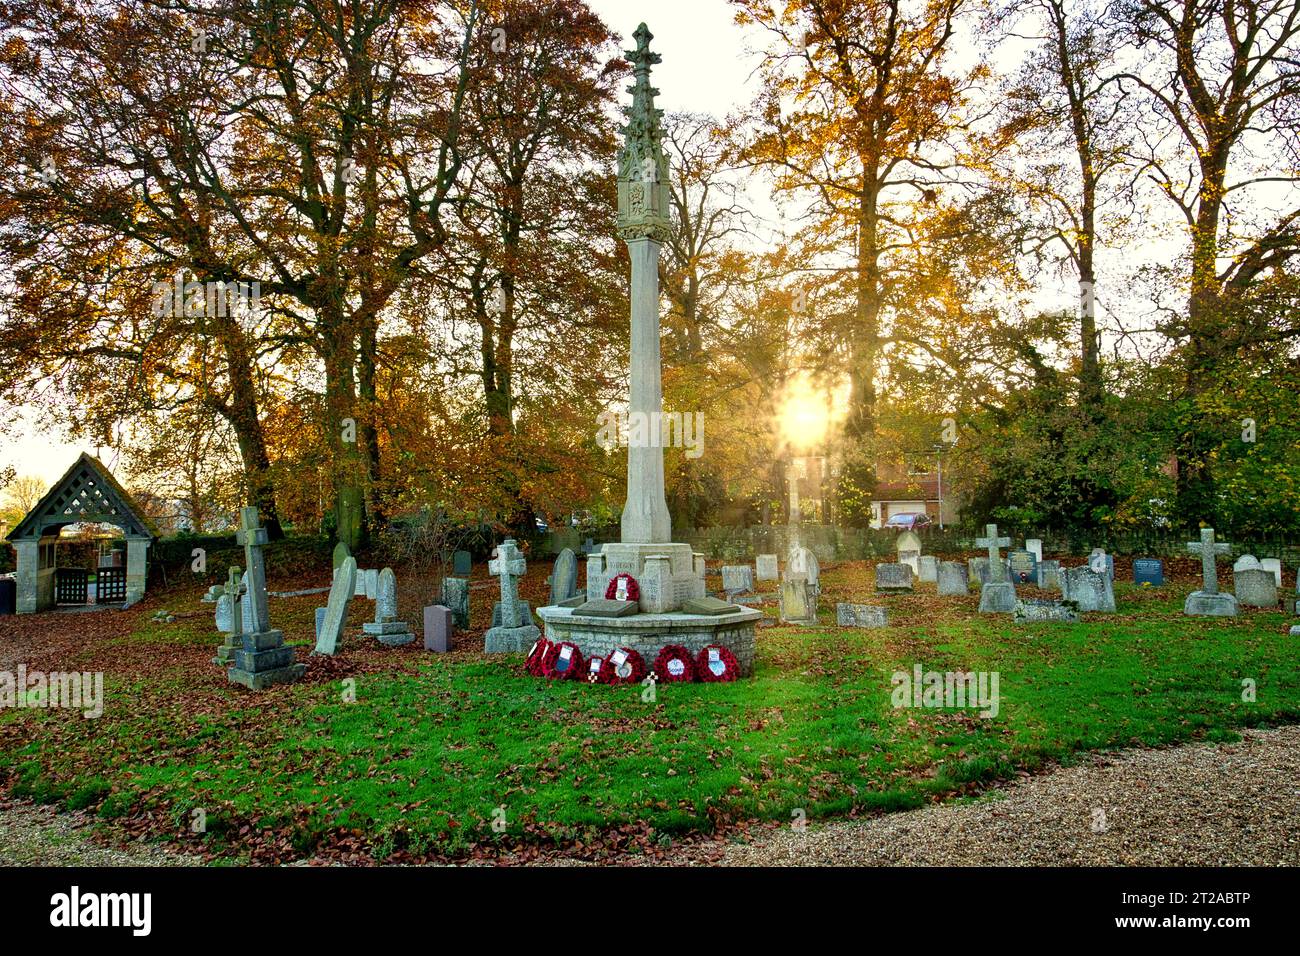 On remembrance day in autumn at sunset, war memorial and wreaths in St Peter's churchyard in the village of Sharnbrook, Bedfordshire, England, UK Stock Photo